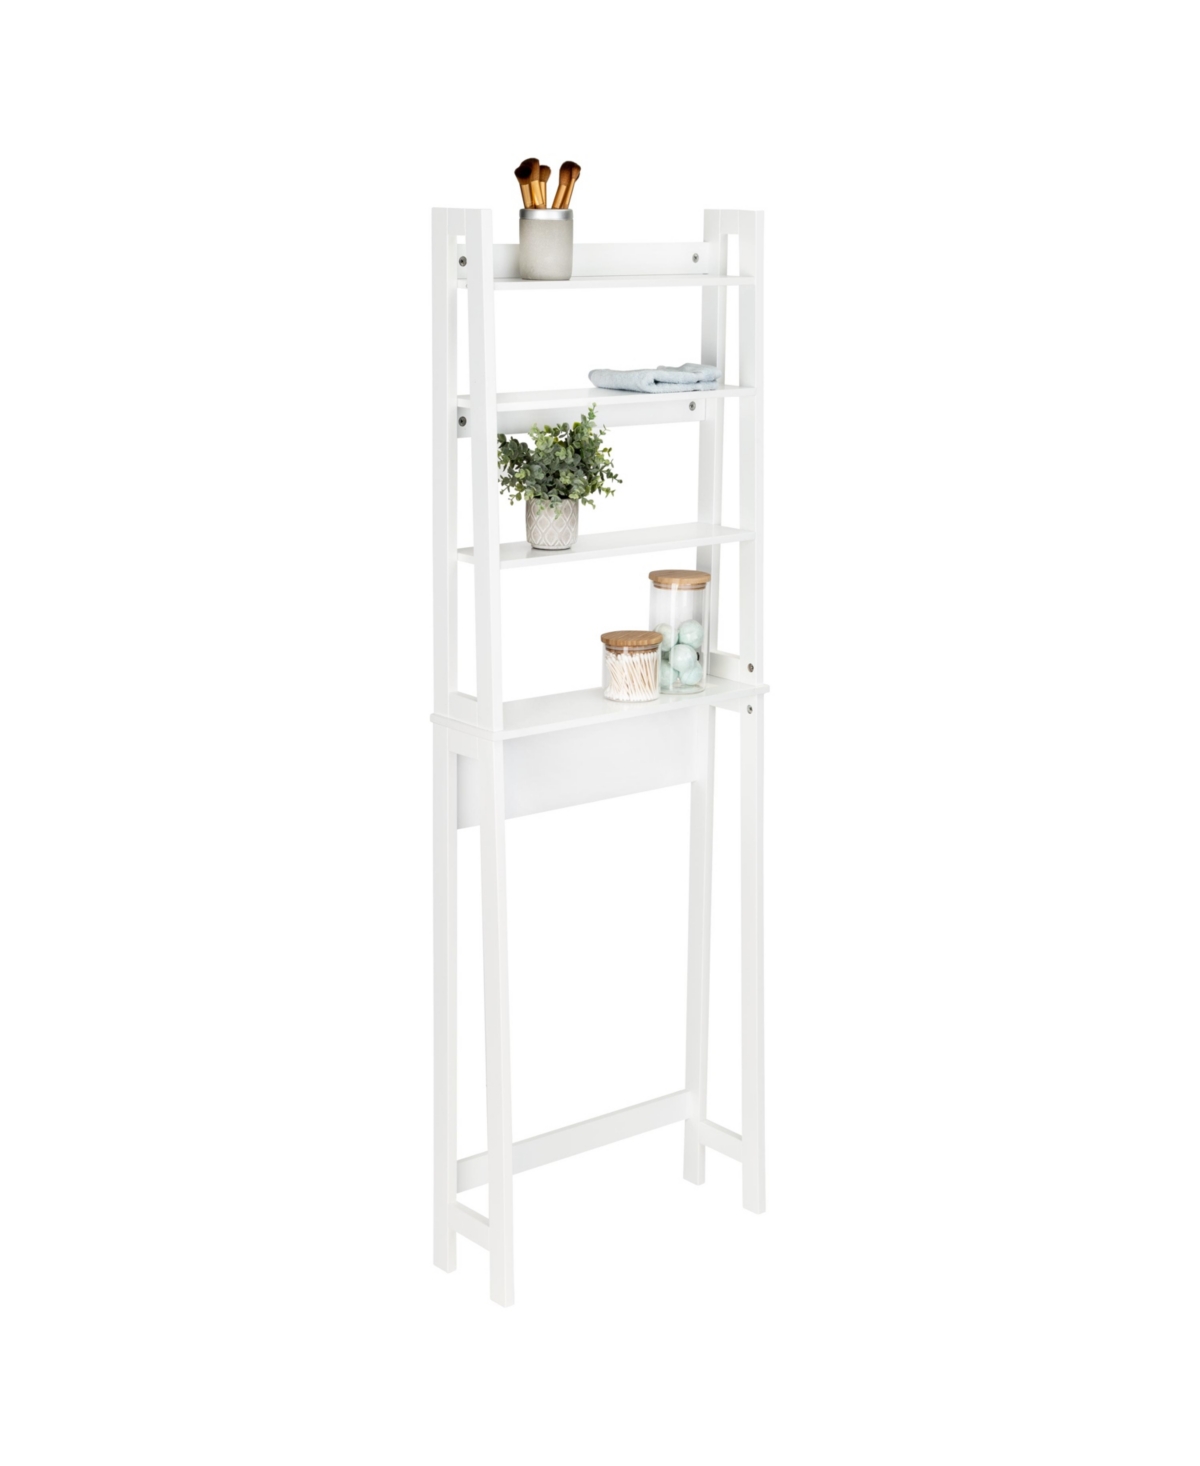 Over-The-Toilet Bathroom Shelving Space Saver - White